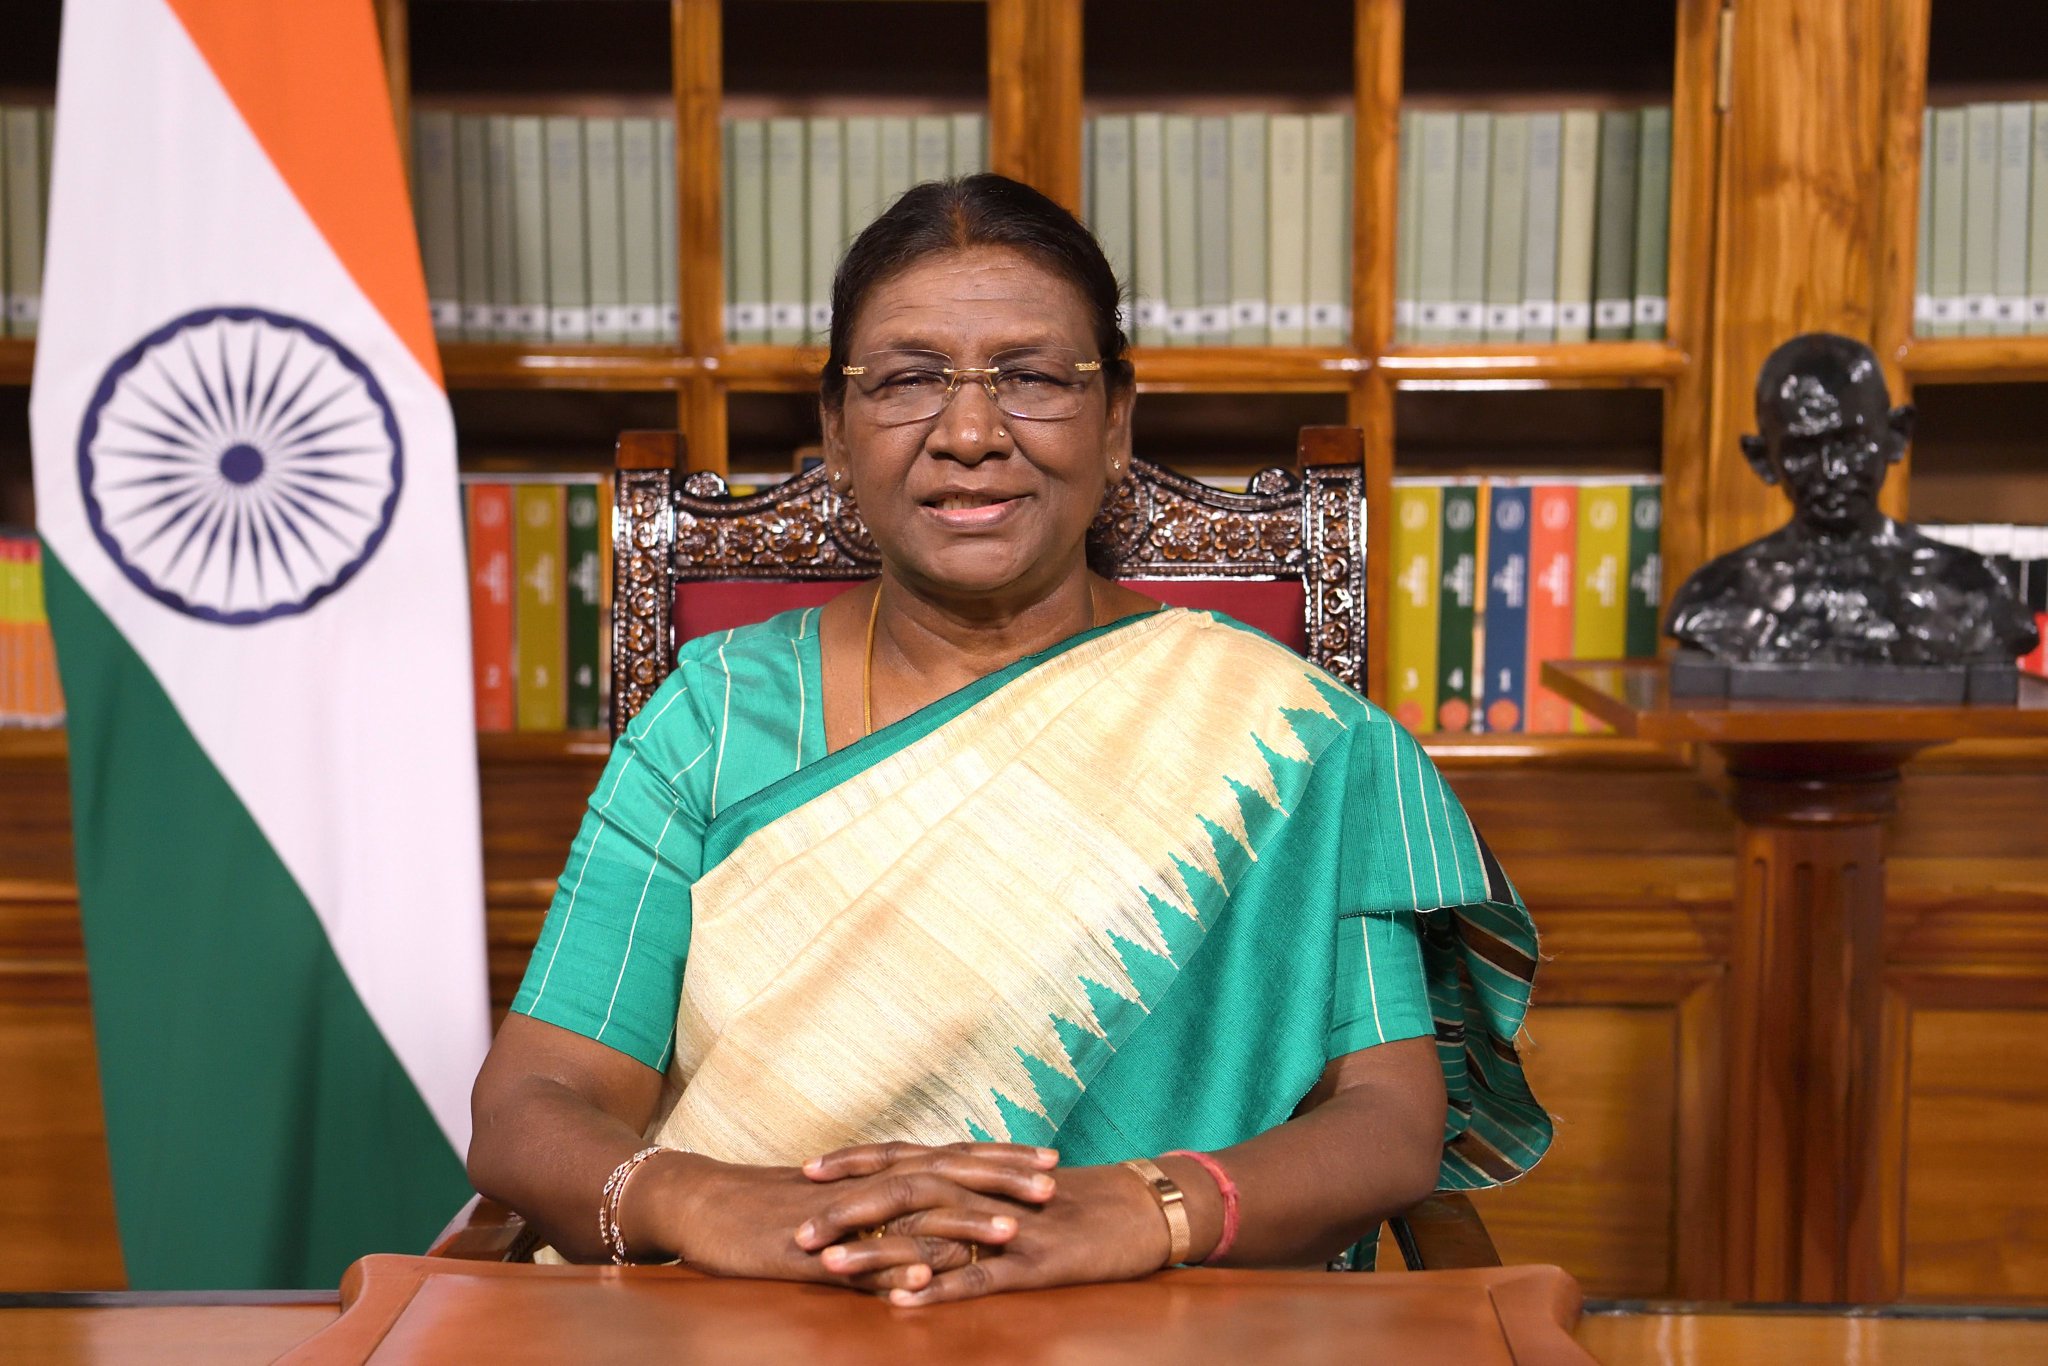 ADDRESS TO THE NATION BY THE HON’BLE PRESIDENT OF INDIA SMT. DROUPADI MURMU ON THE EVE OF THE 77TH INDEPENDENCE DAY